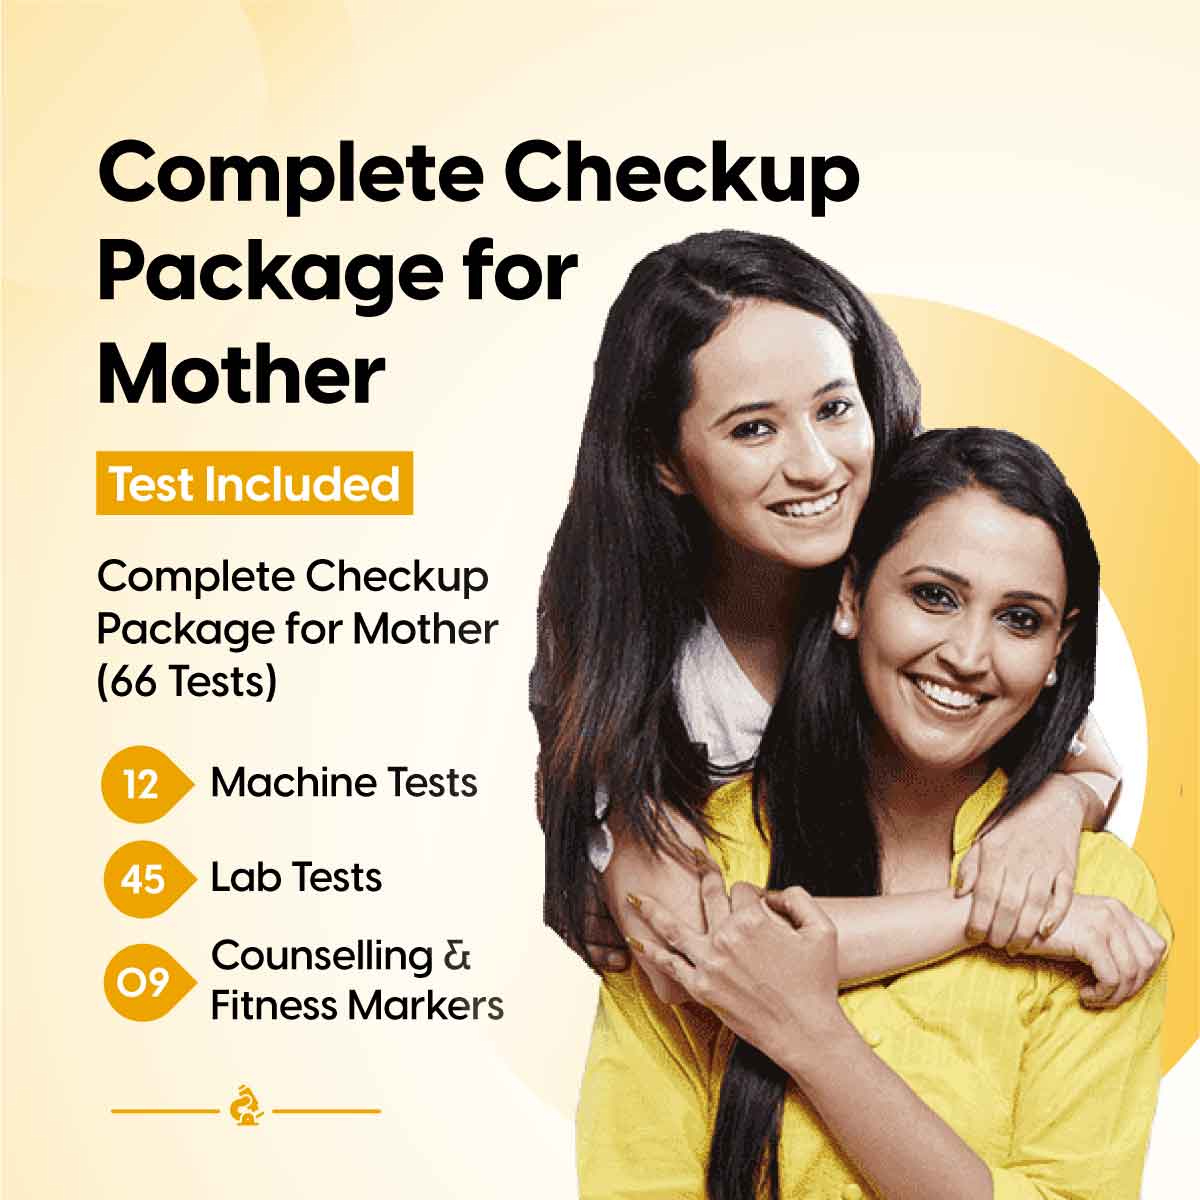 Complete-Checkup-Package-for-Mother